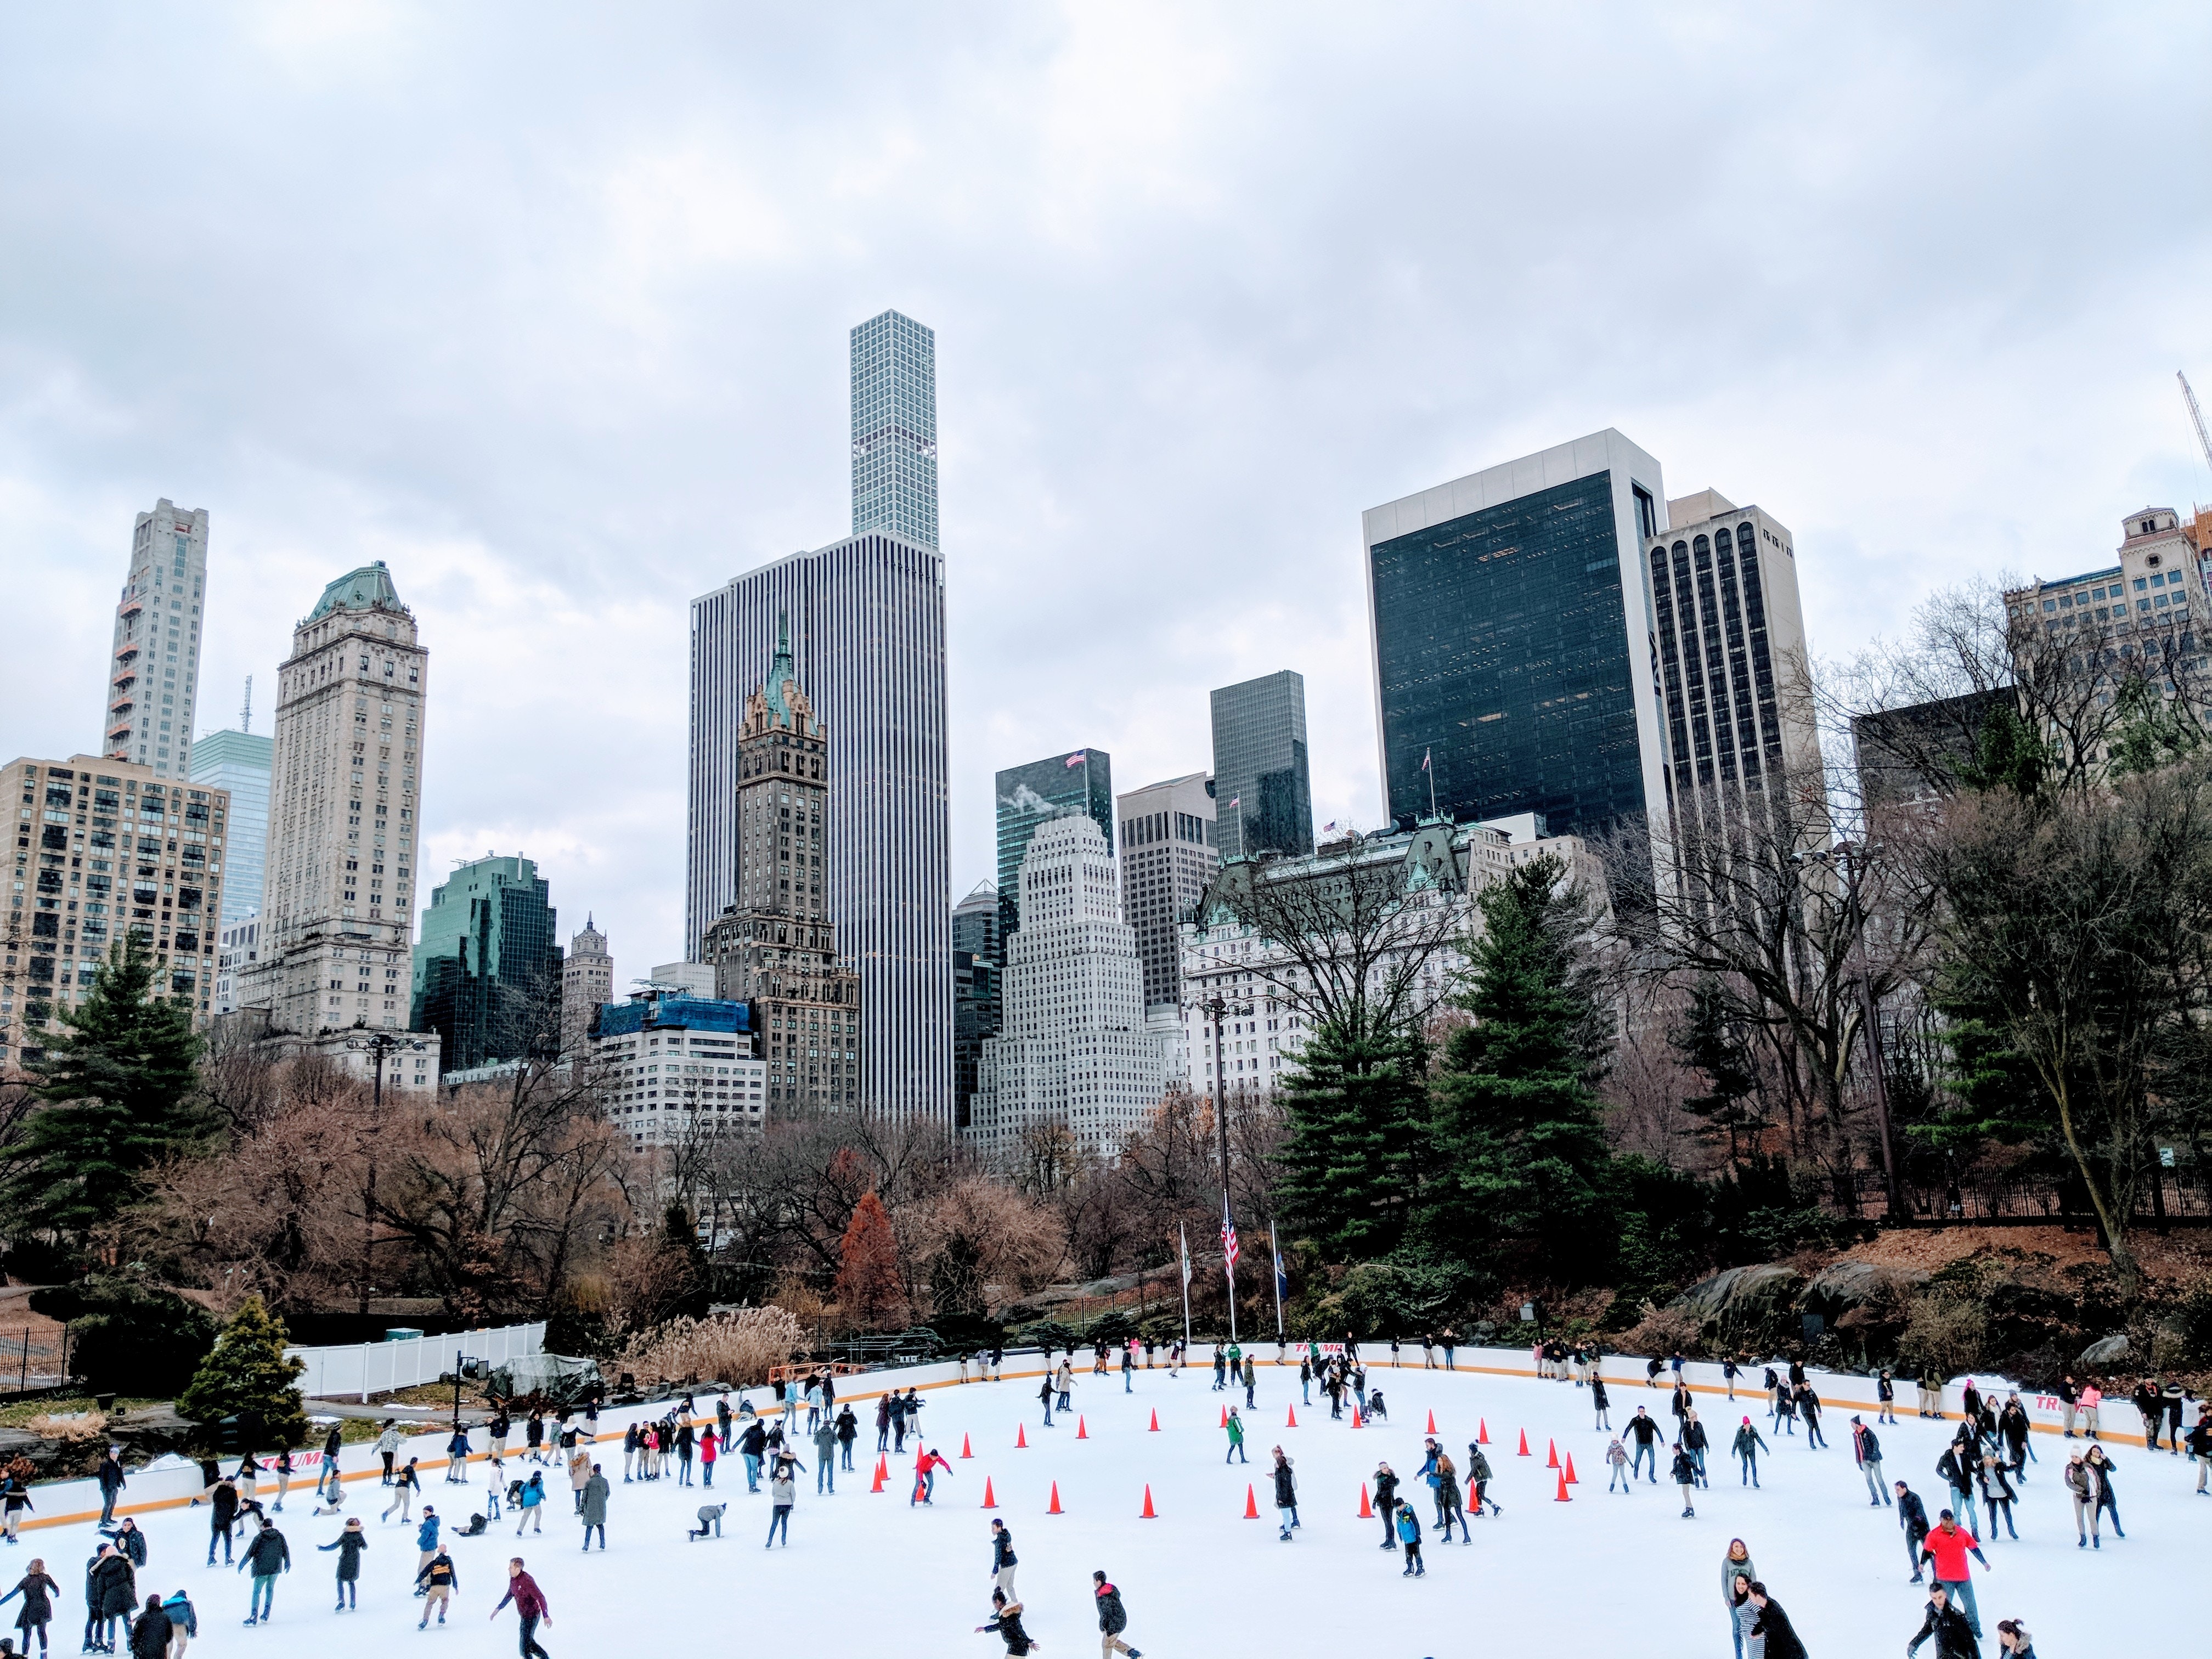 People skating on an ice rink in a big city